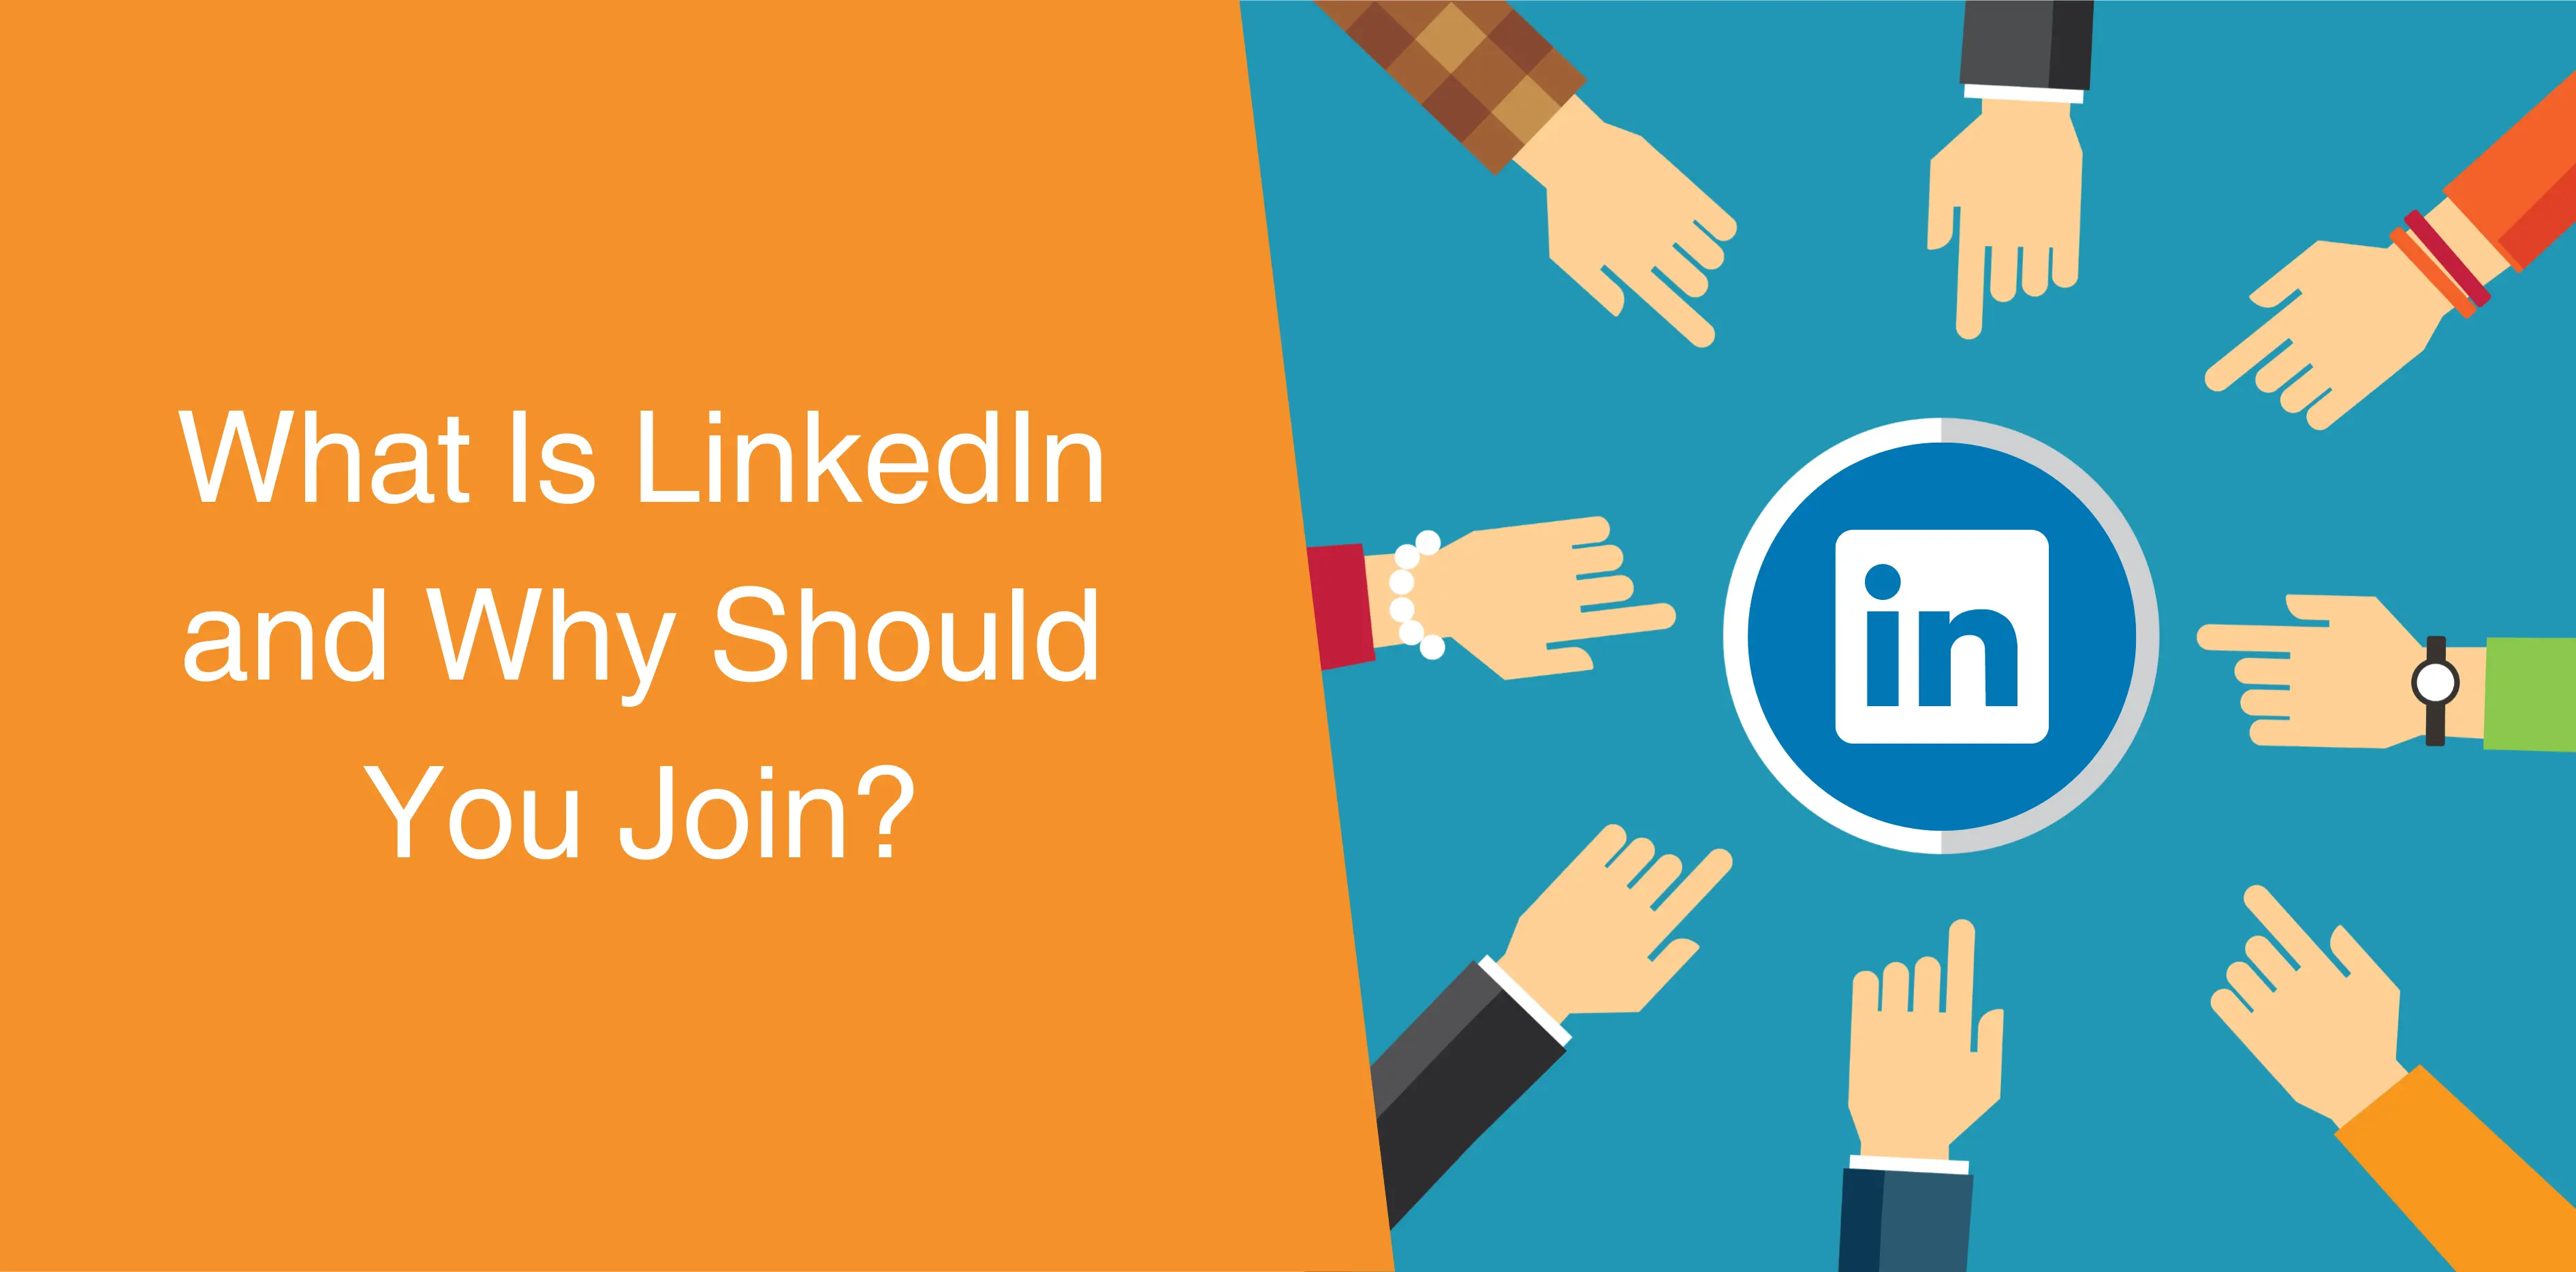 What Is LinkedIn and Why Should You Join?